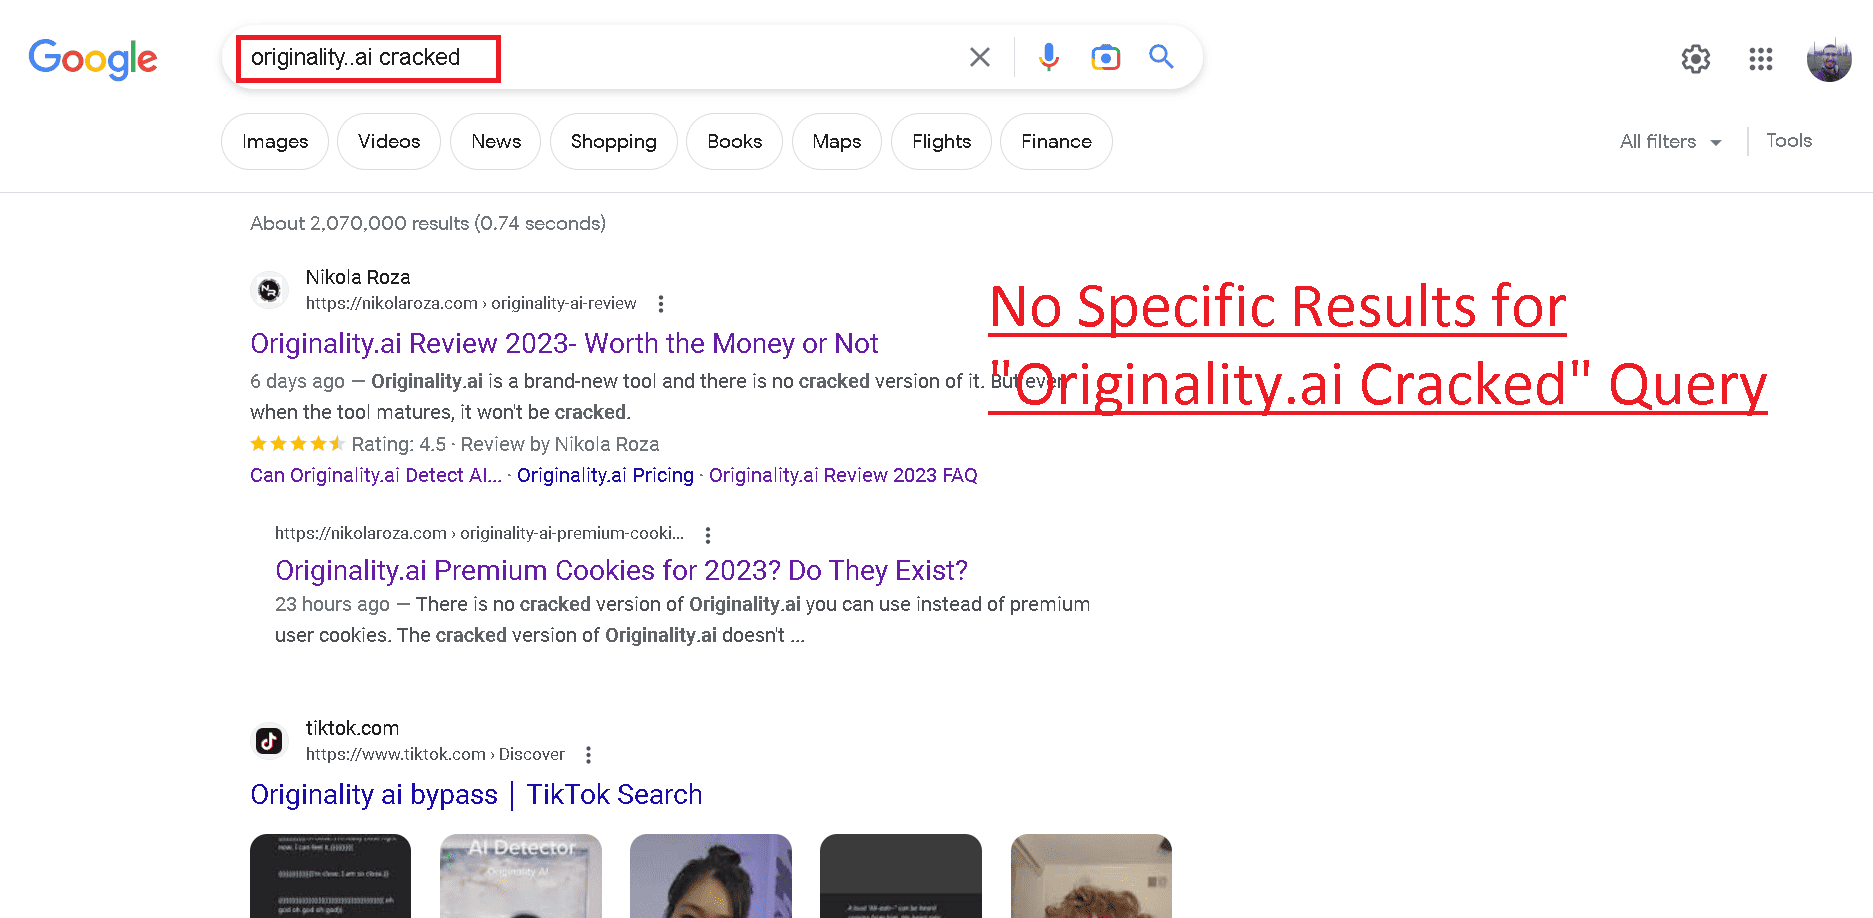 Originality.ai cracked query searched in Google